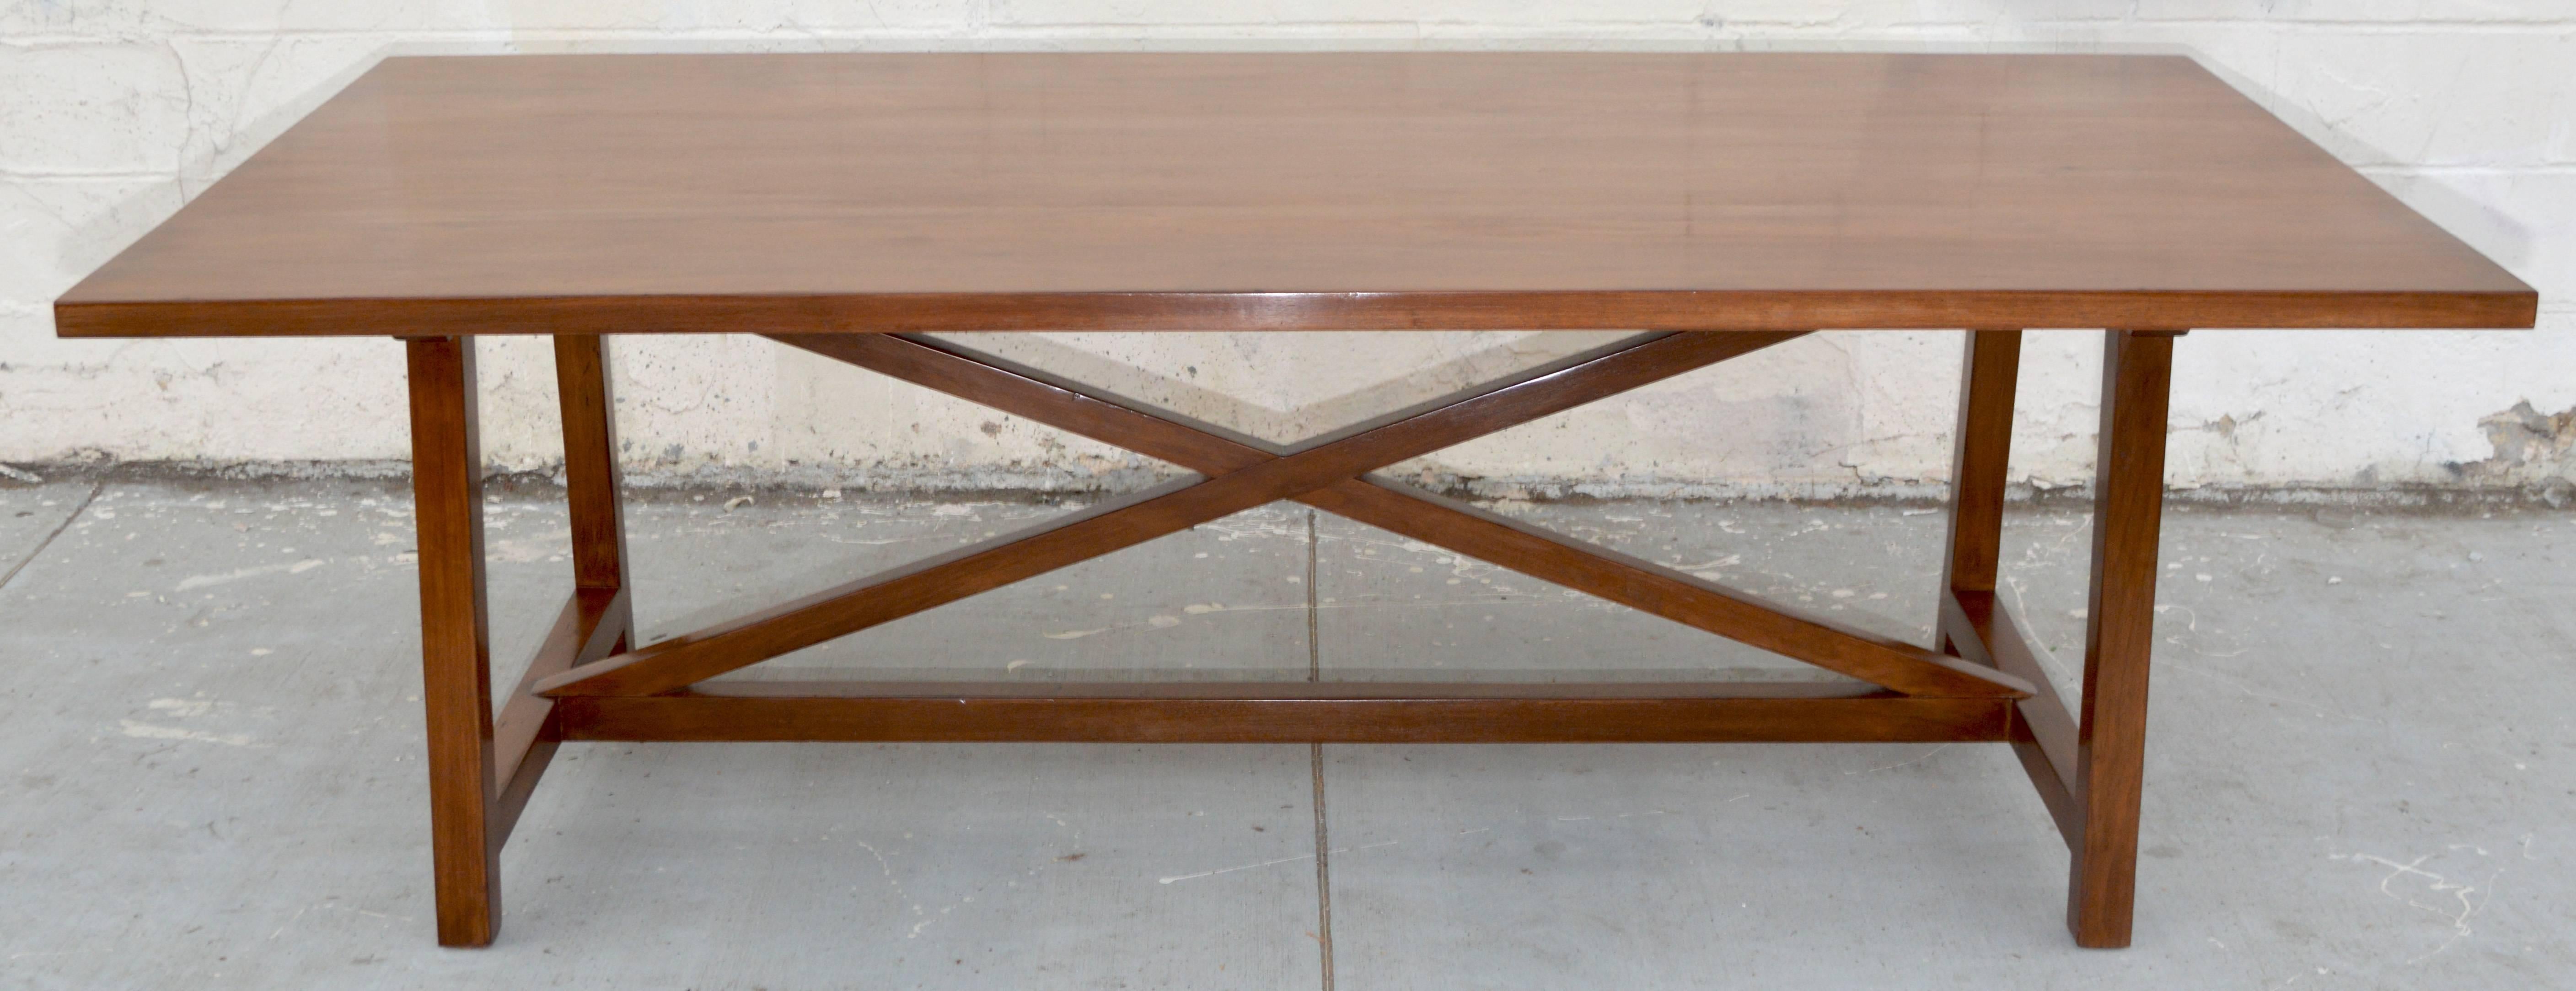 This custom dining table in walnut has splayed legs and stretchers crossed in an 'X', this table can be ordered with or without extensions. Shown here, this table is 114